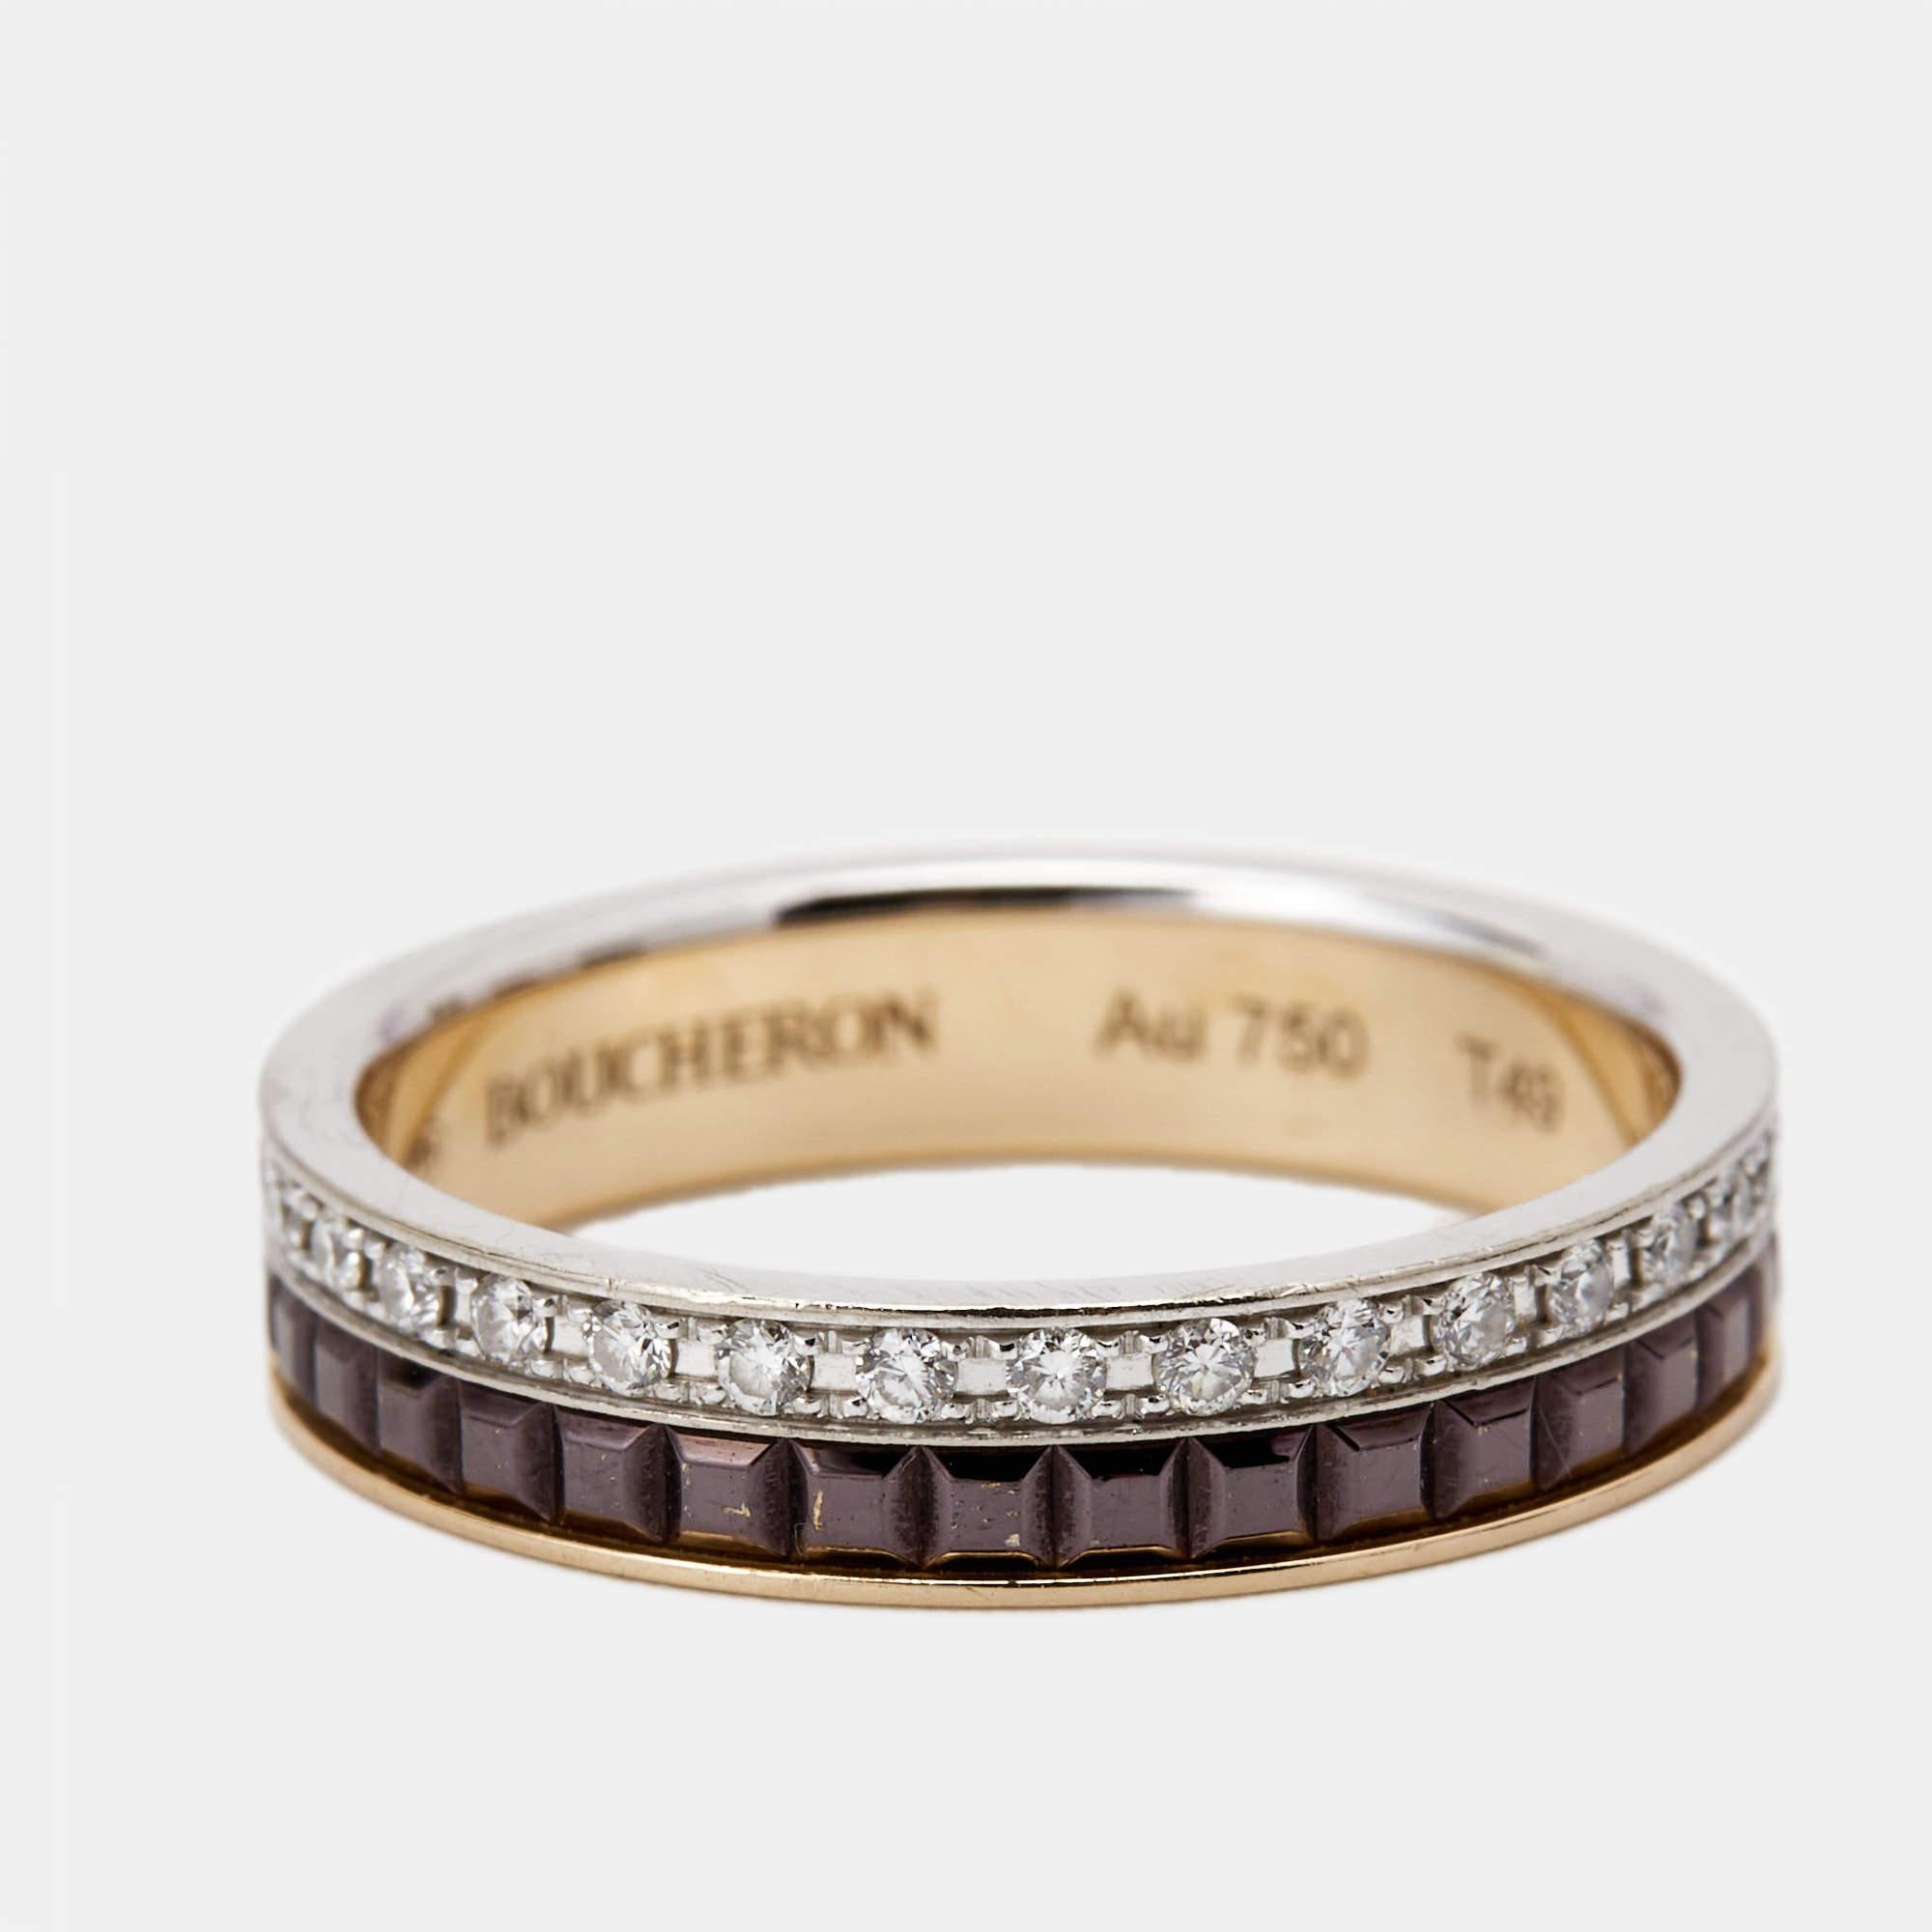 Boucheron's Quatre collection beautifully presents the spirit of the brand, exemplifying craftsmanship and an intricate play of textures and gold. The very collection offers you this ring arranged preciously in 18k two-tone gold and PVD ceramic